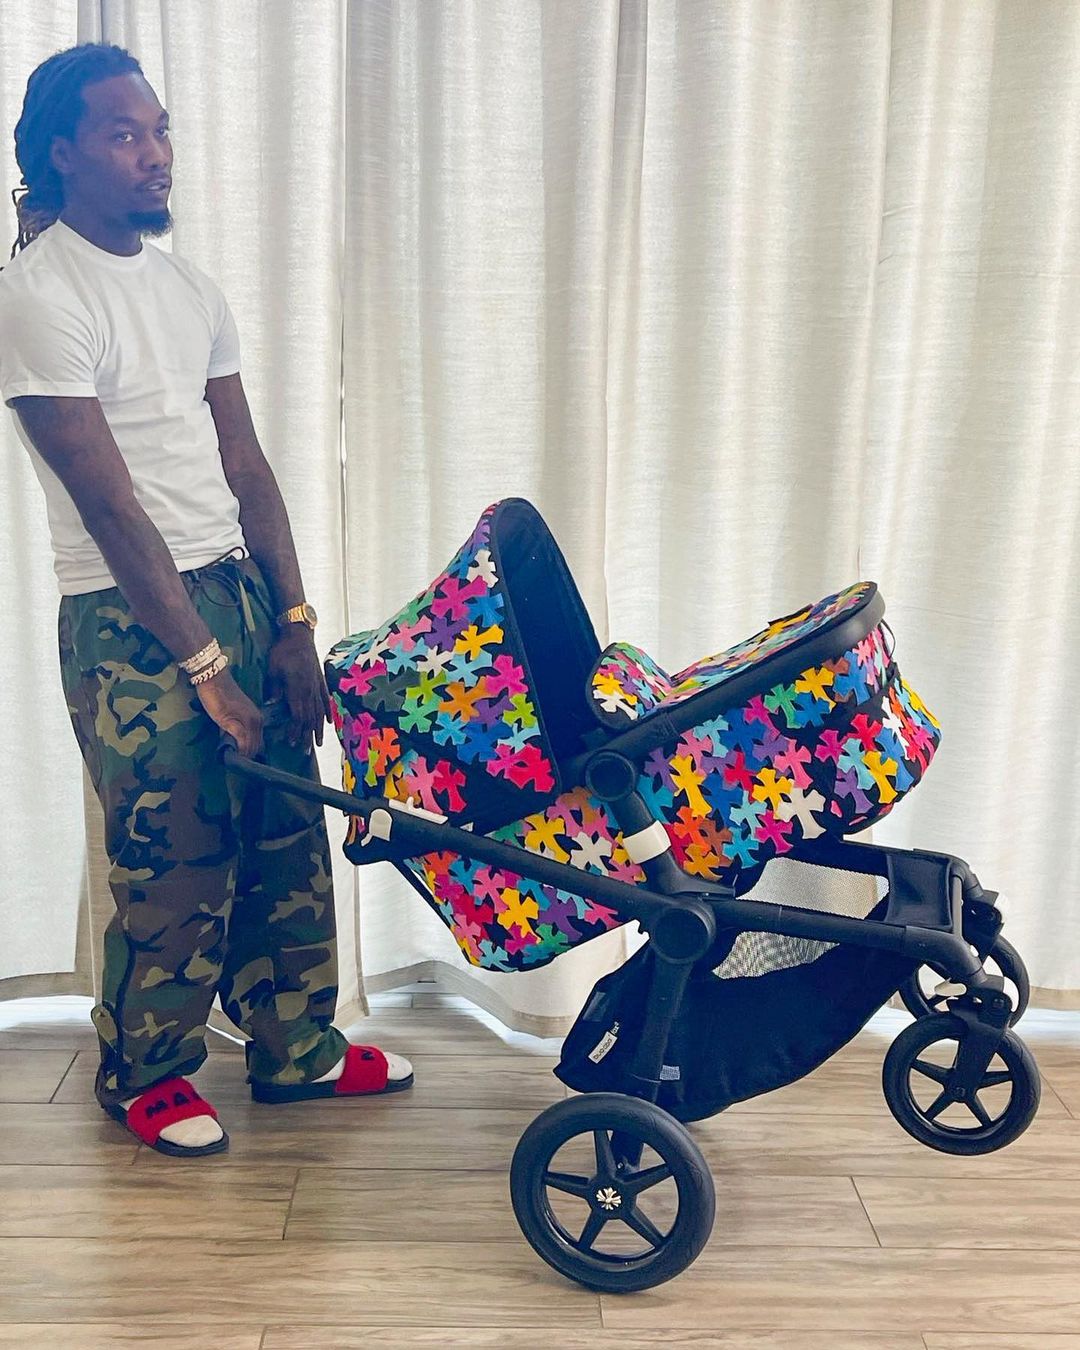 Chrome Hearts Gifted Offset and Cardi B Boy 1-of-1 Custom Stroller